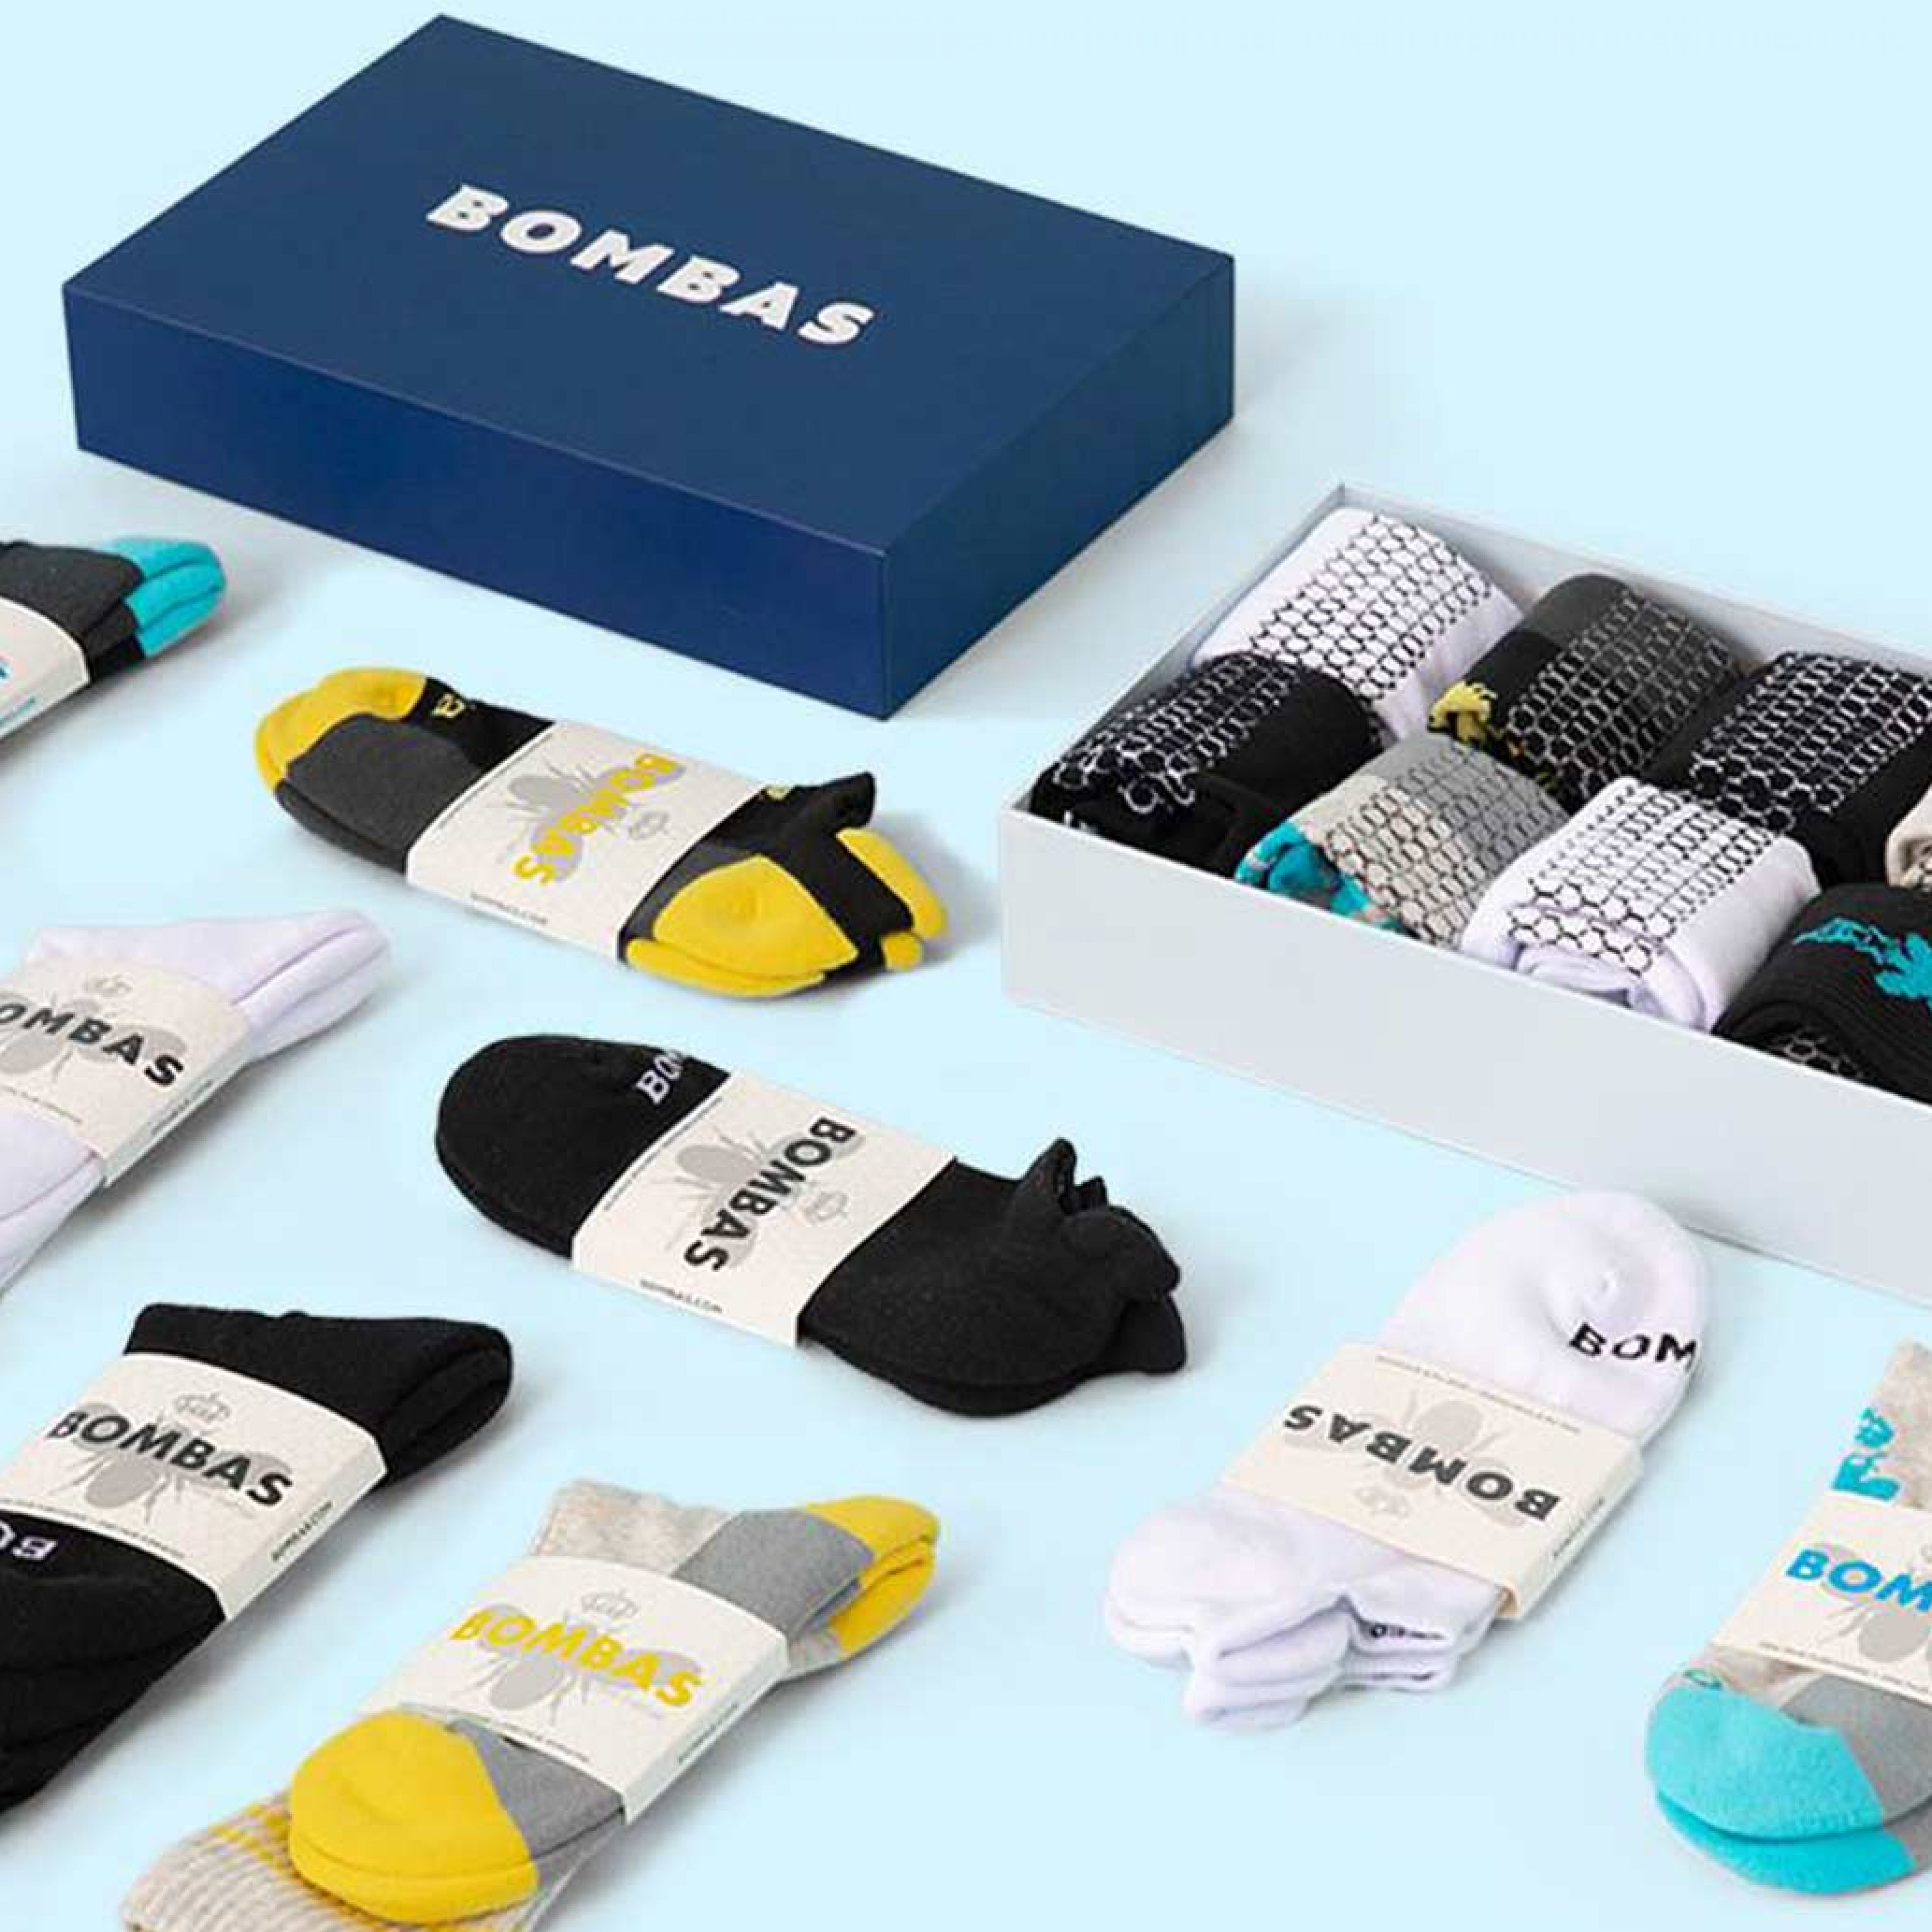 Bombas: A Successful Business That Is Helping the Homeless